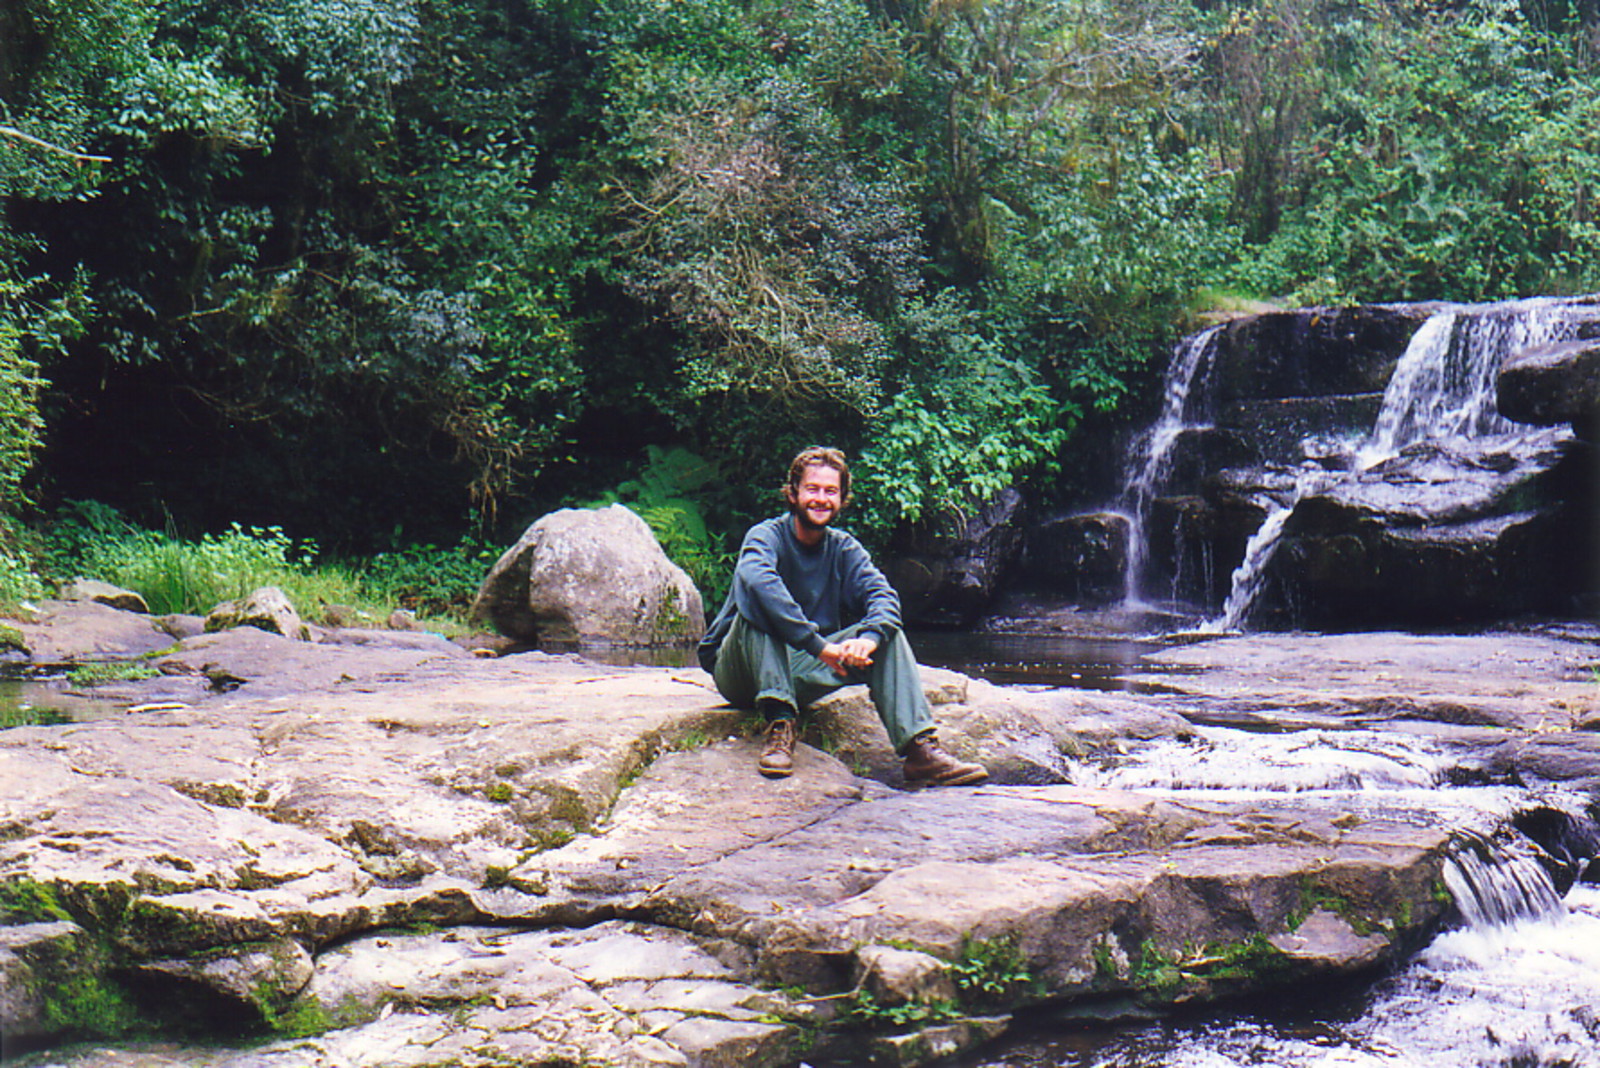 Mark sitting by a waterfall